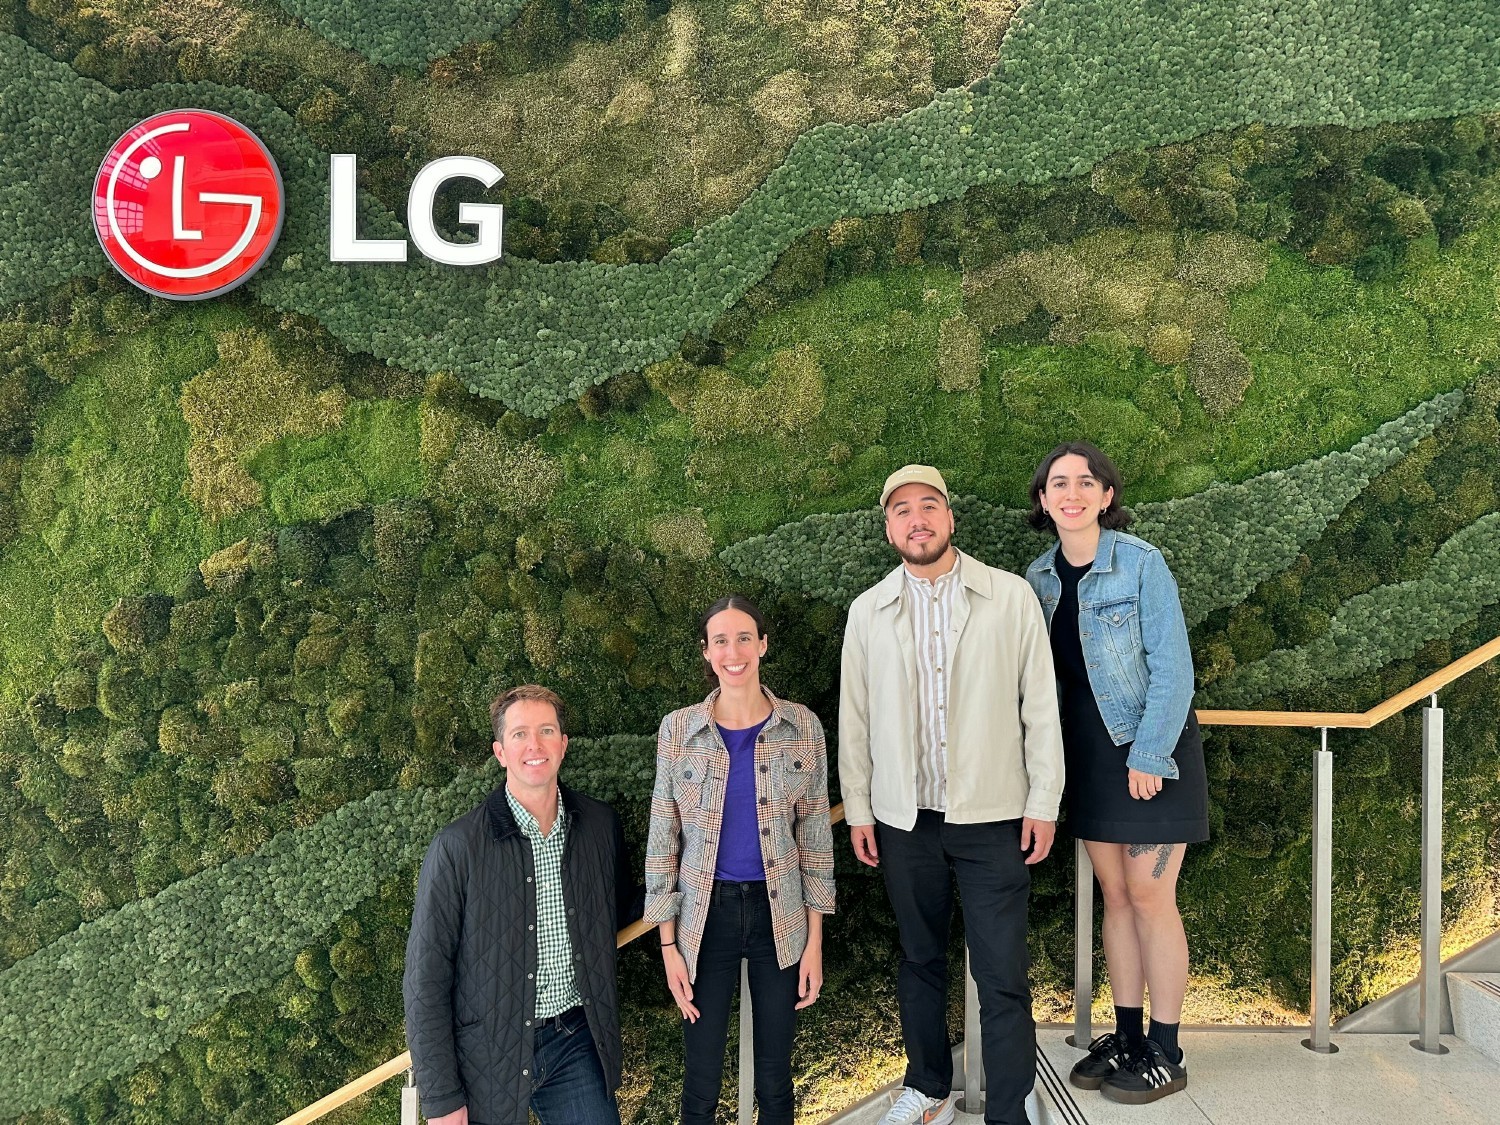 The Team visiting the LG office.